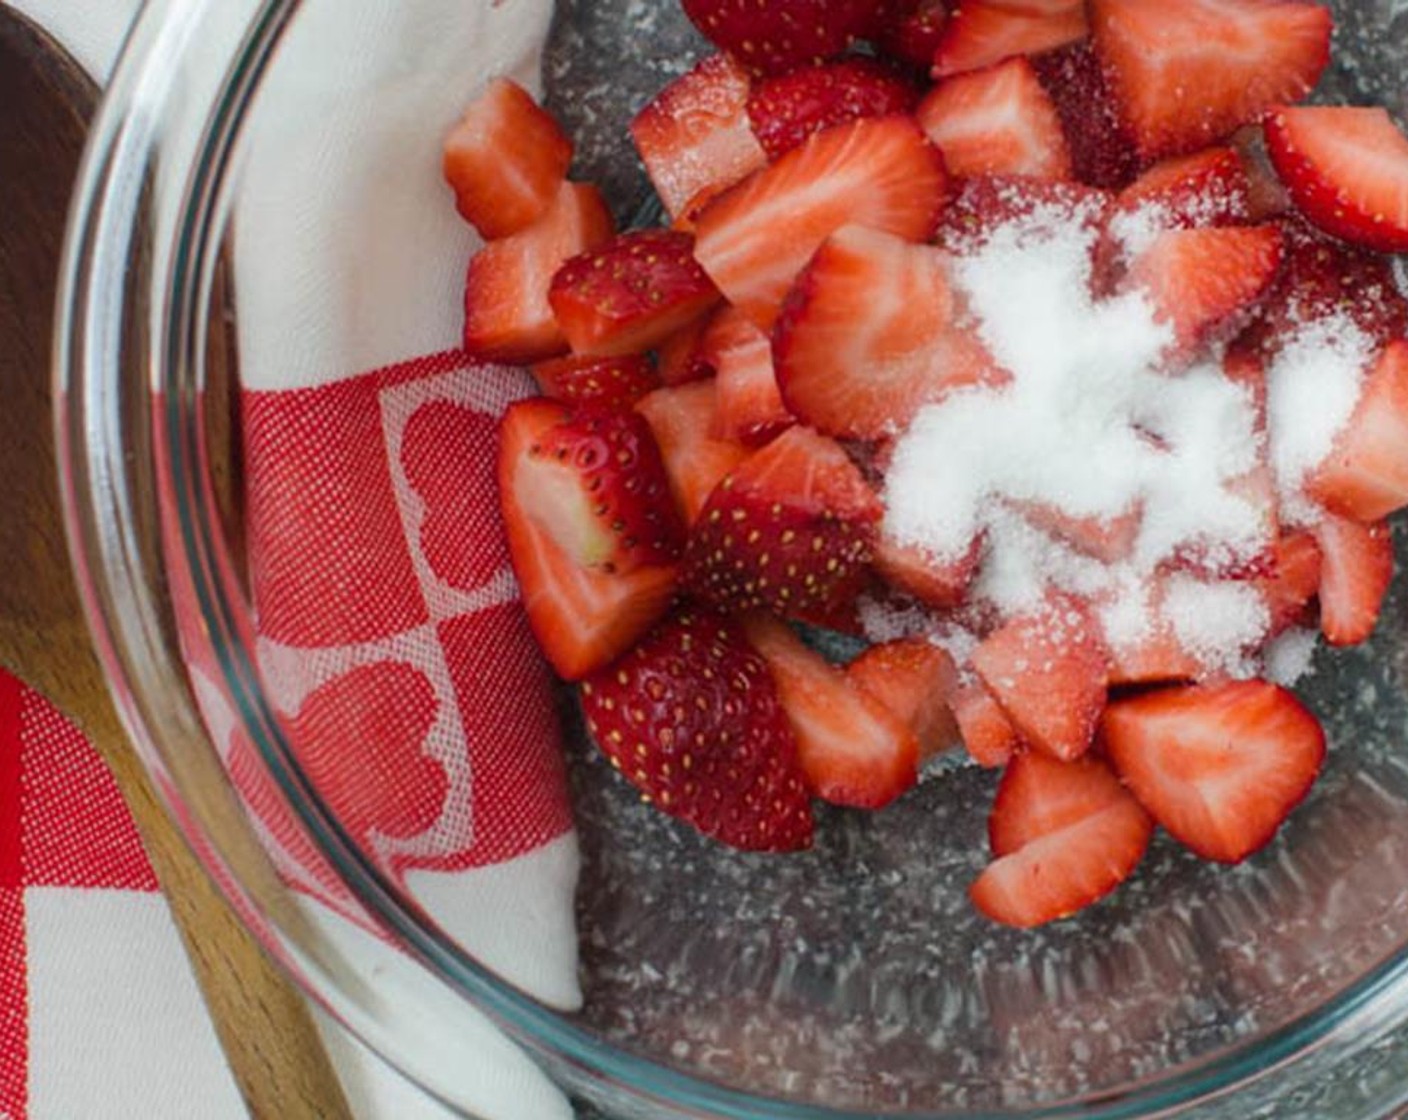 step 2 In a small bowl, combine the Fresh Strawberry (1 cup) and Granulated Sugar (1 Tbsp). Toss to combine and set aside.